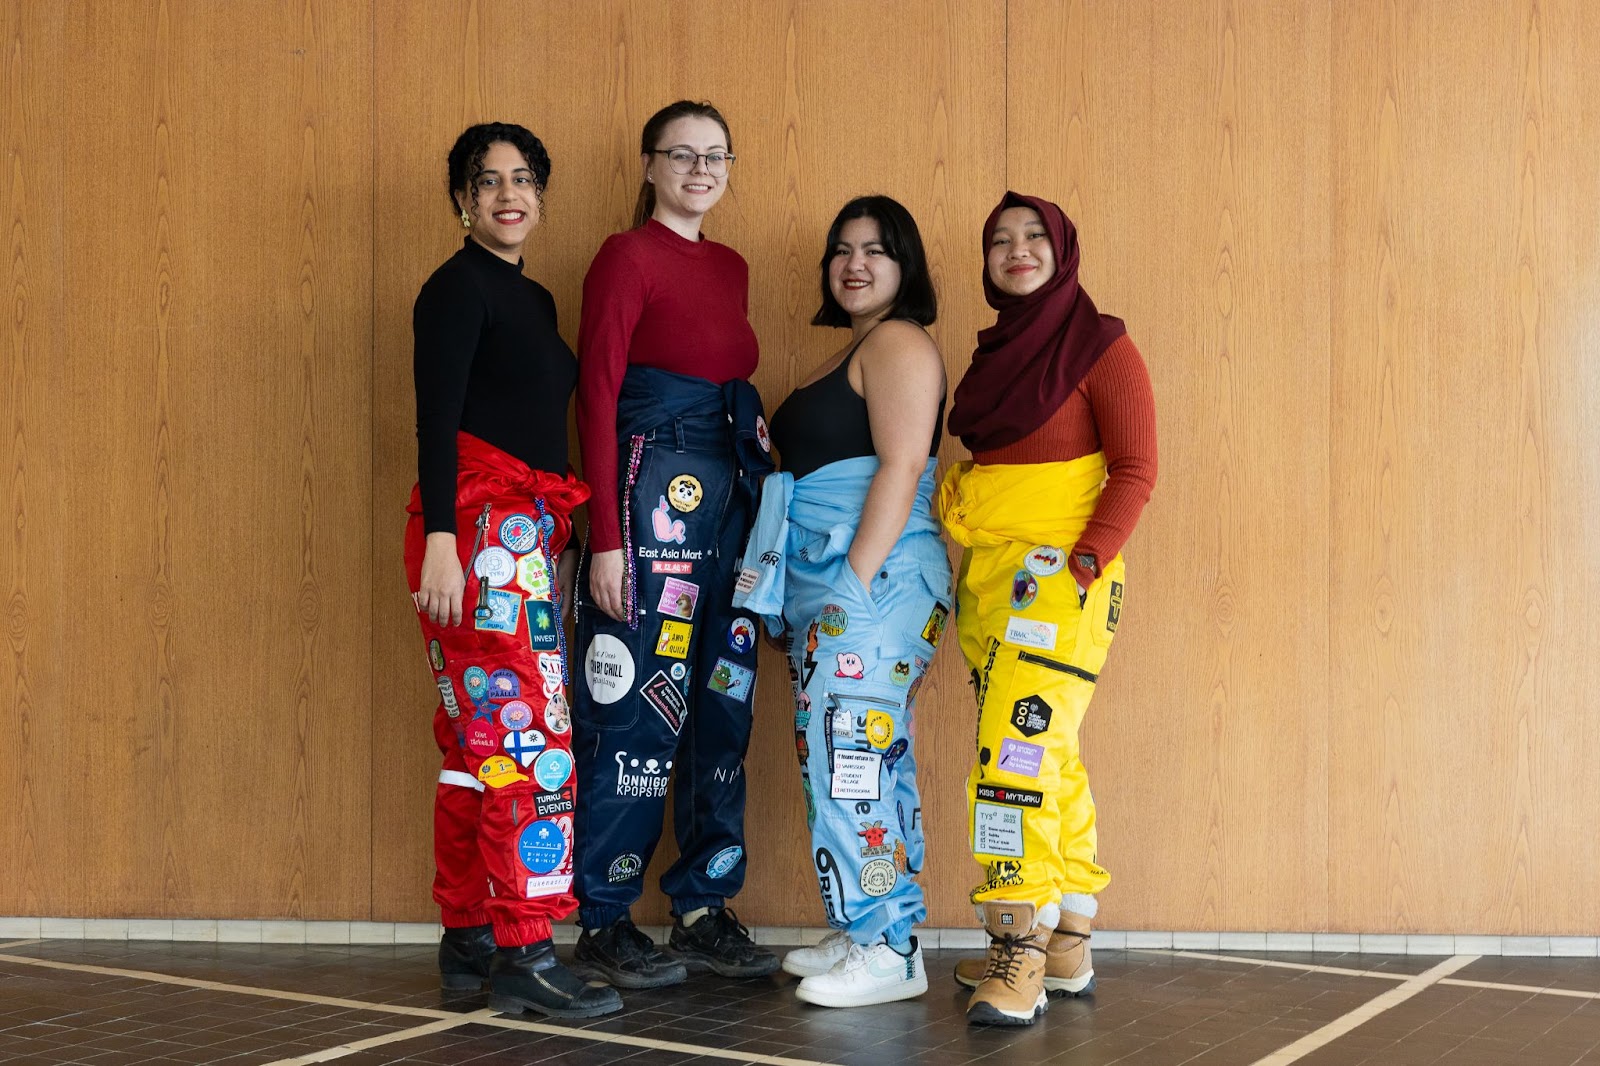 Students in overalls